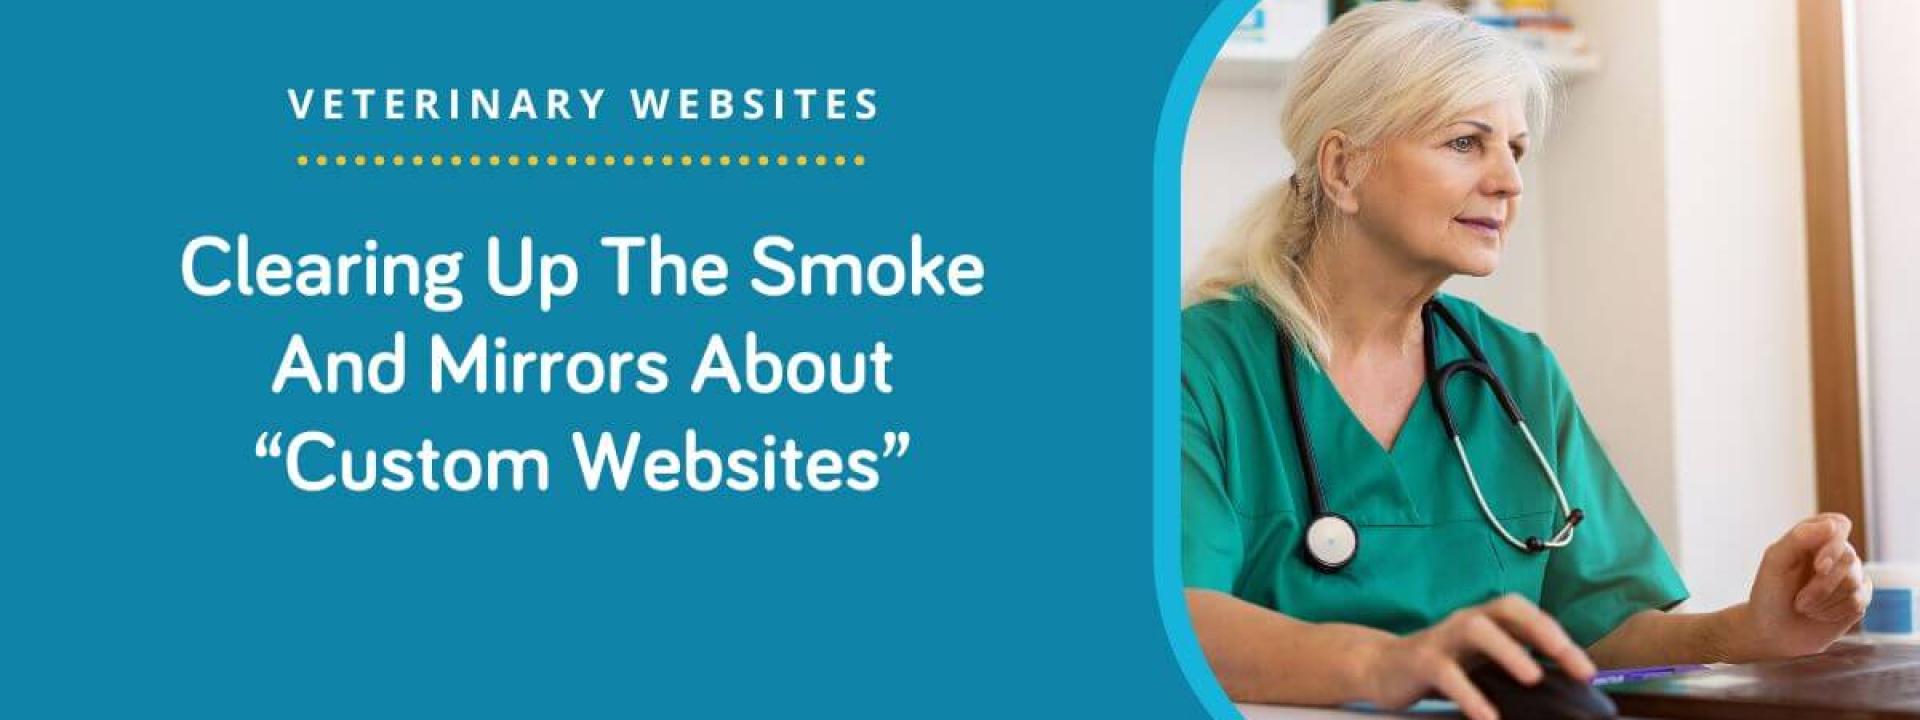 Clearing Up The Smoke And Mirrors About “Custom Websites”